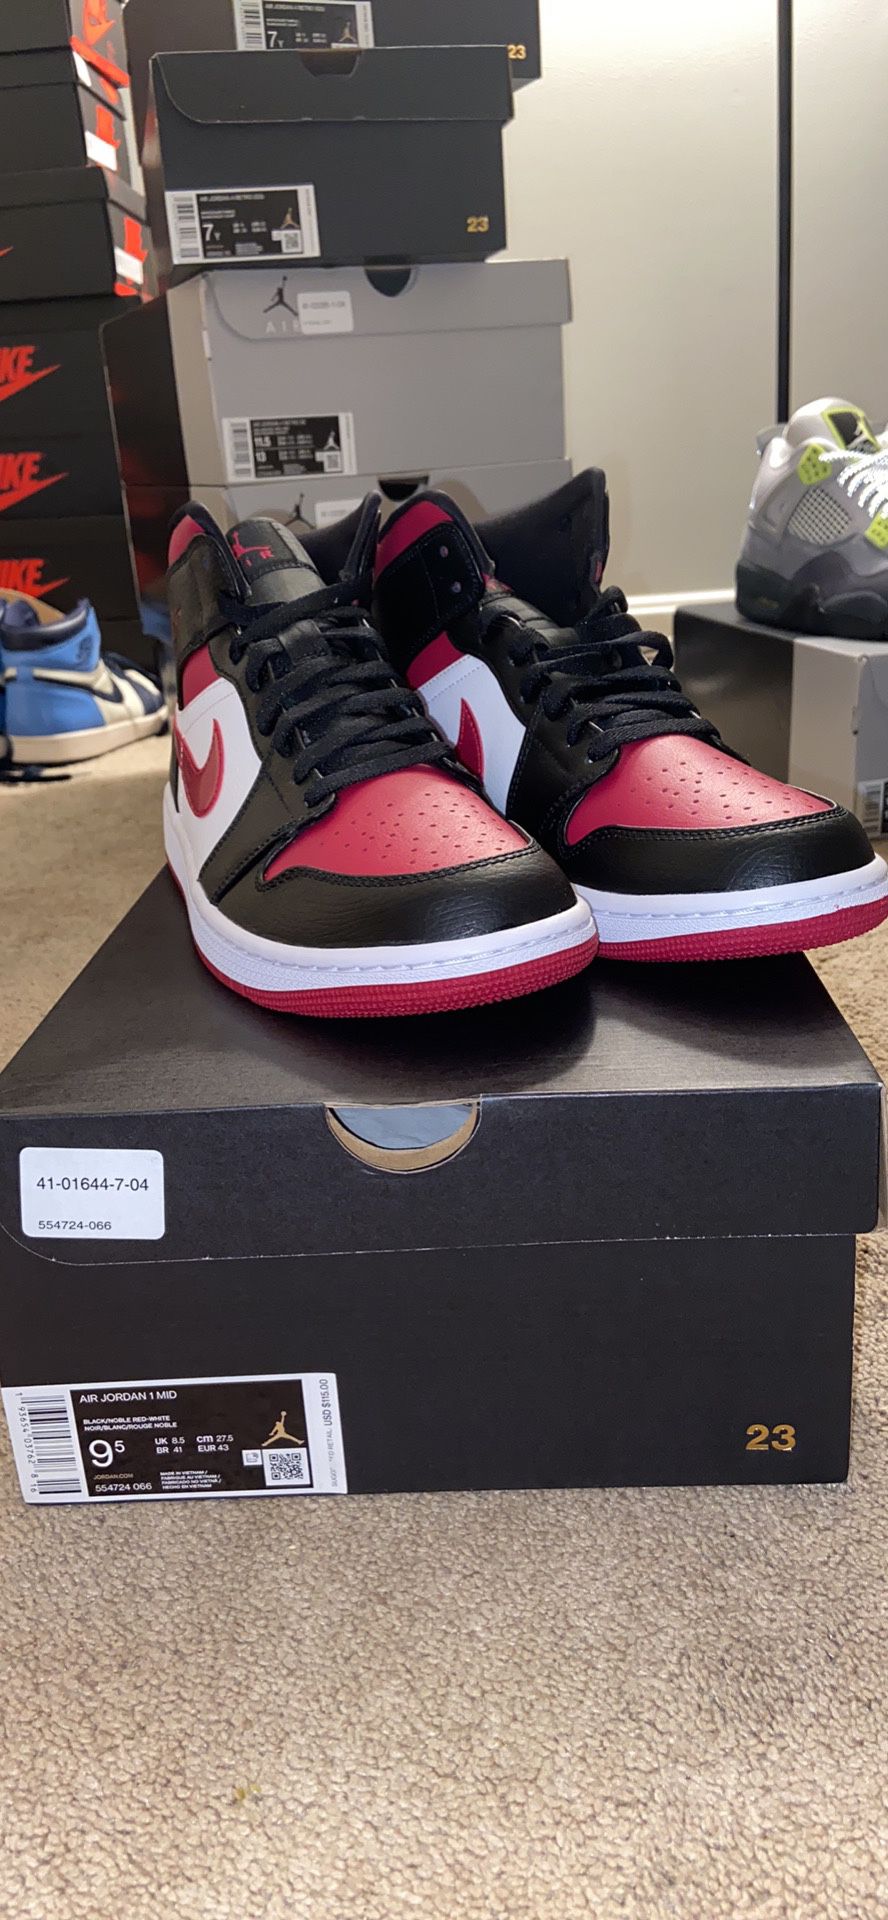 Jordan 1 Mid Bred Toes!! Great Price!! Size 9.5